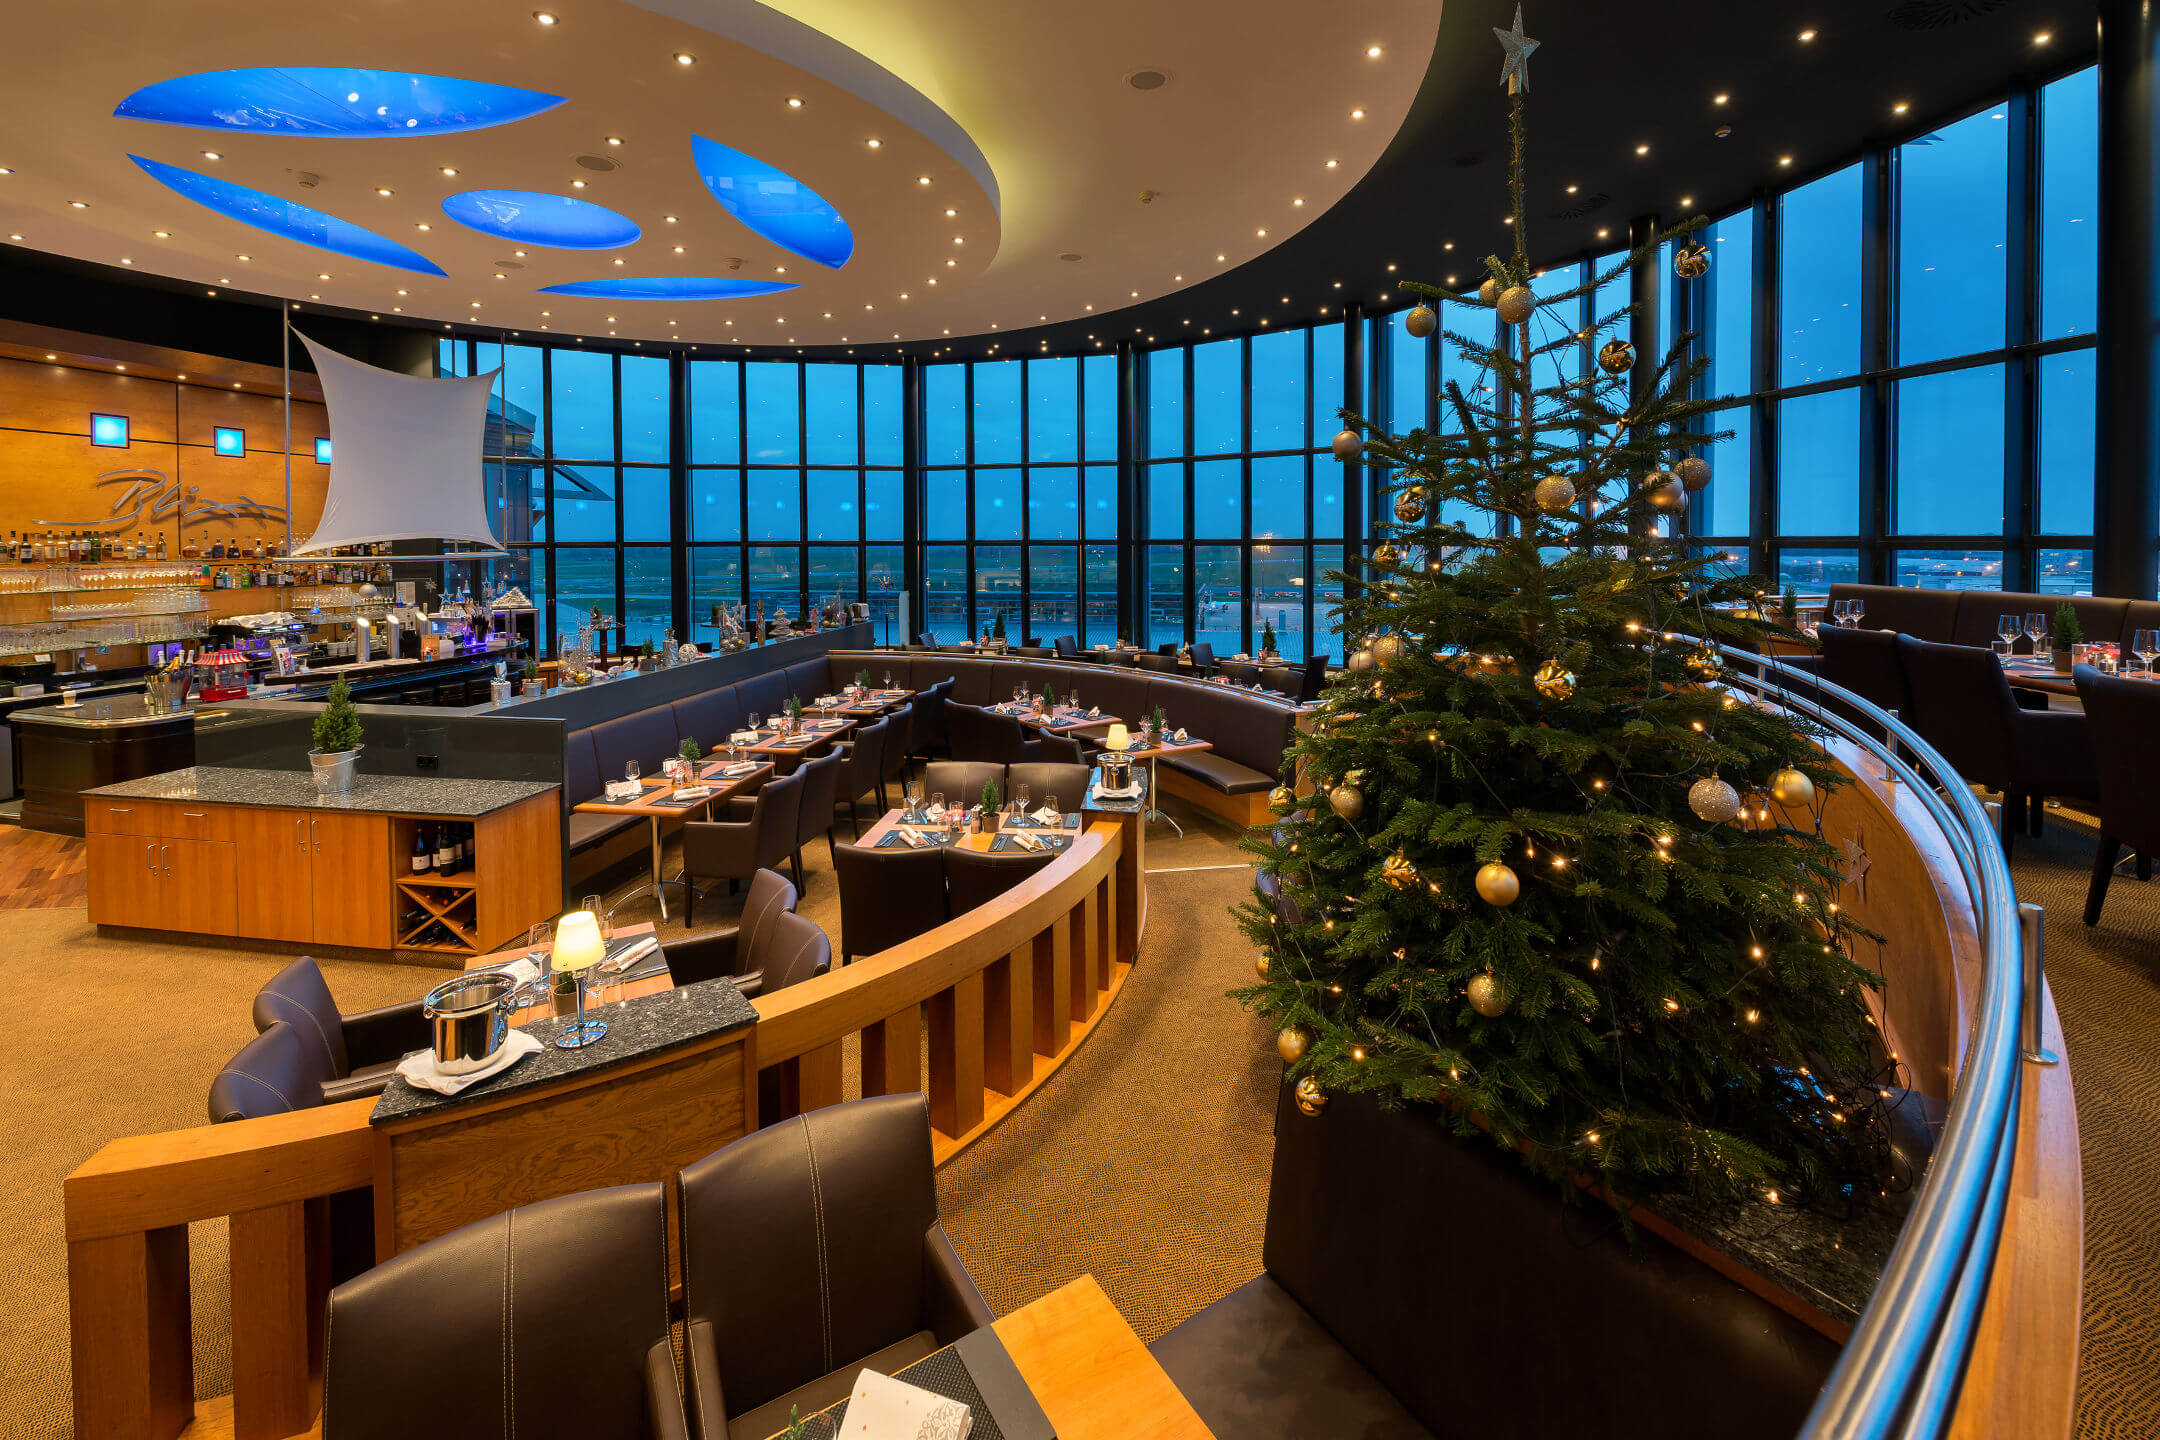 All-round view during Christmas in the BLIXX restaurant in Bremen